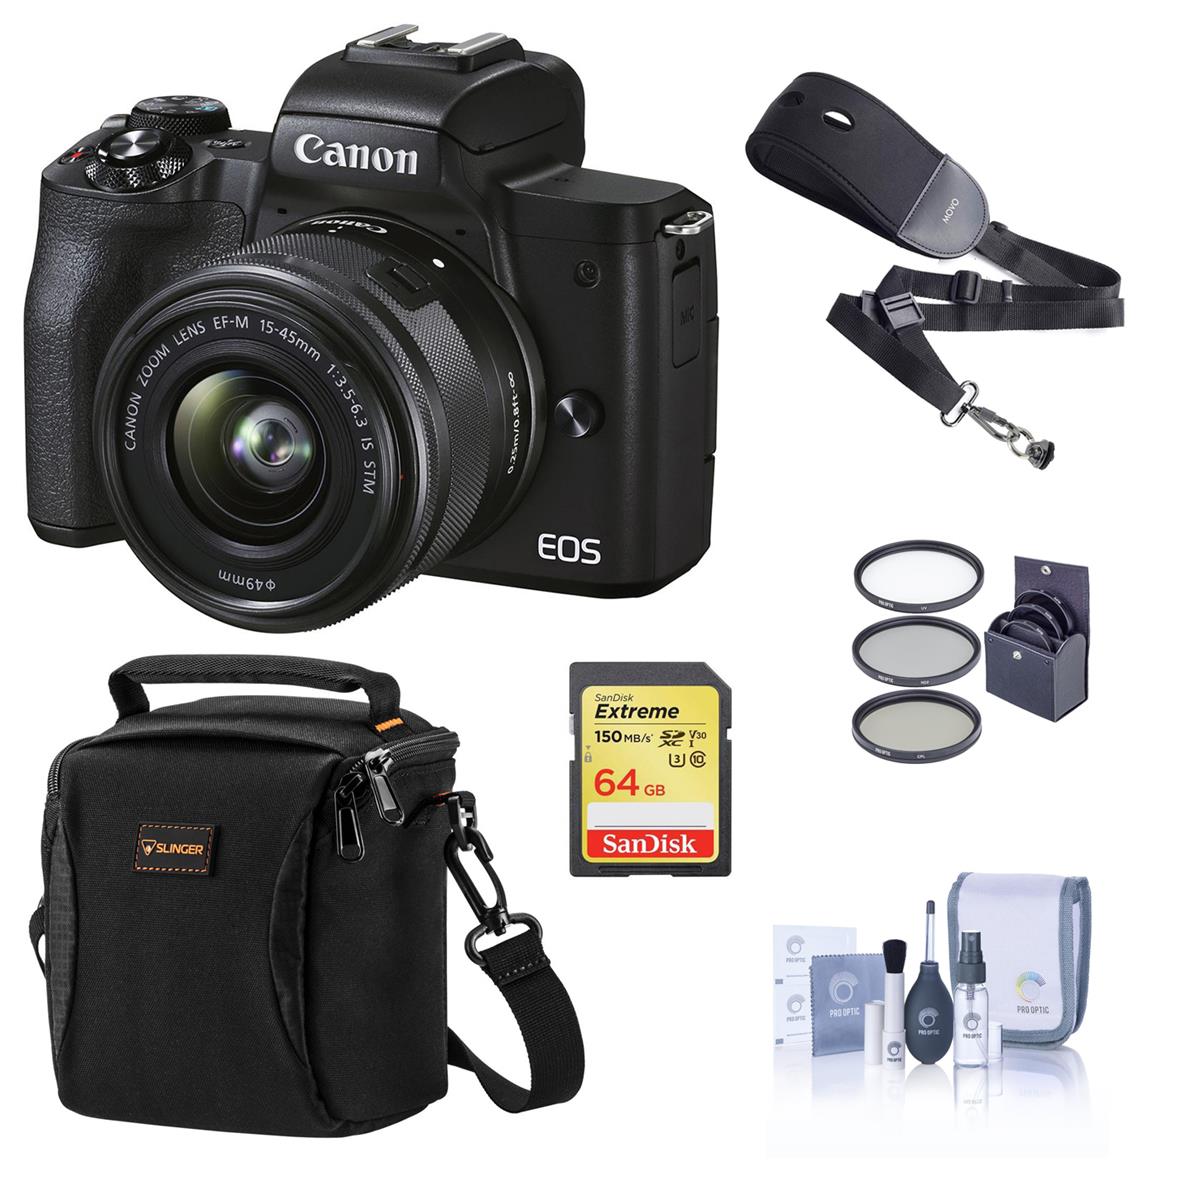 Canon EOS M50 Mark II Mirrorless Camera with 15-45mm Lens (Black) with Free Acc.